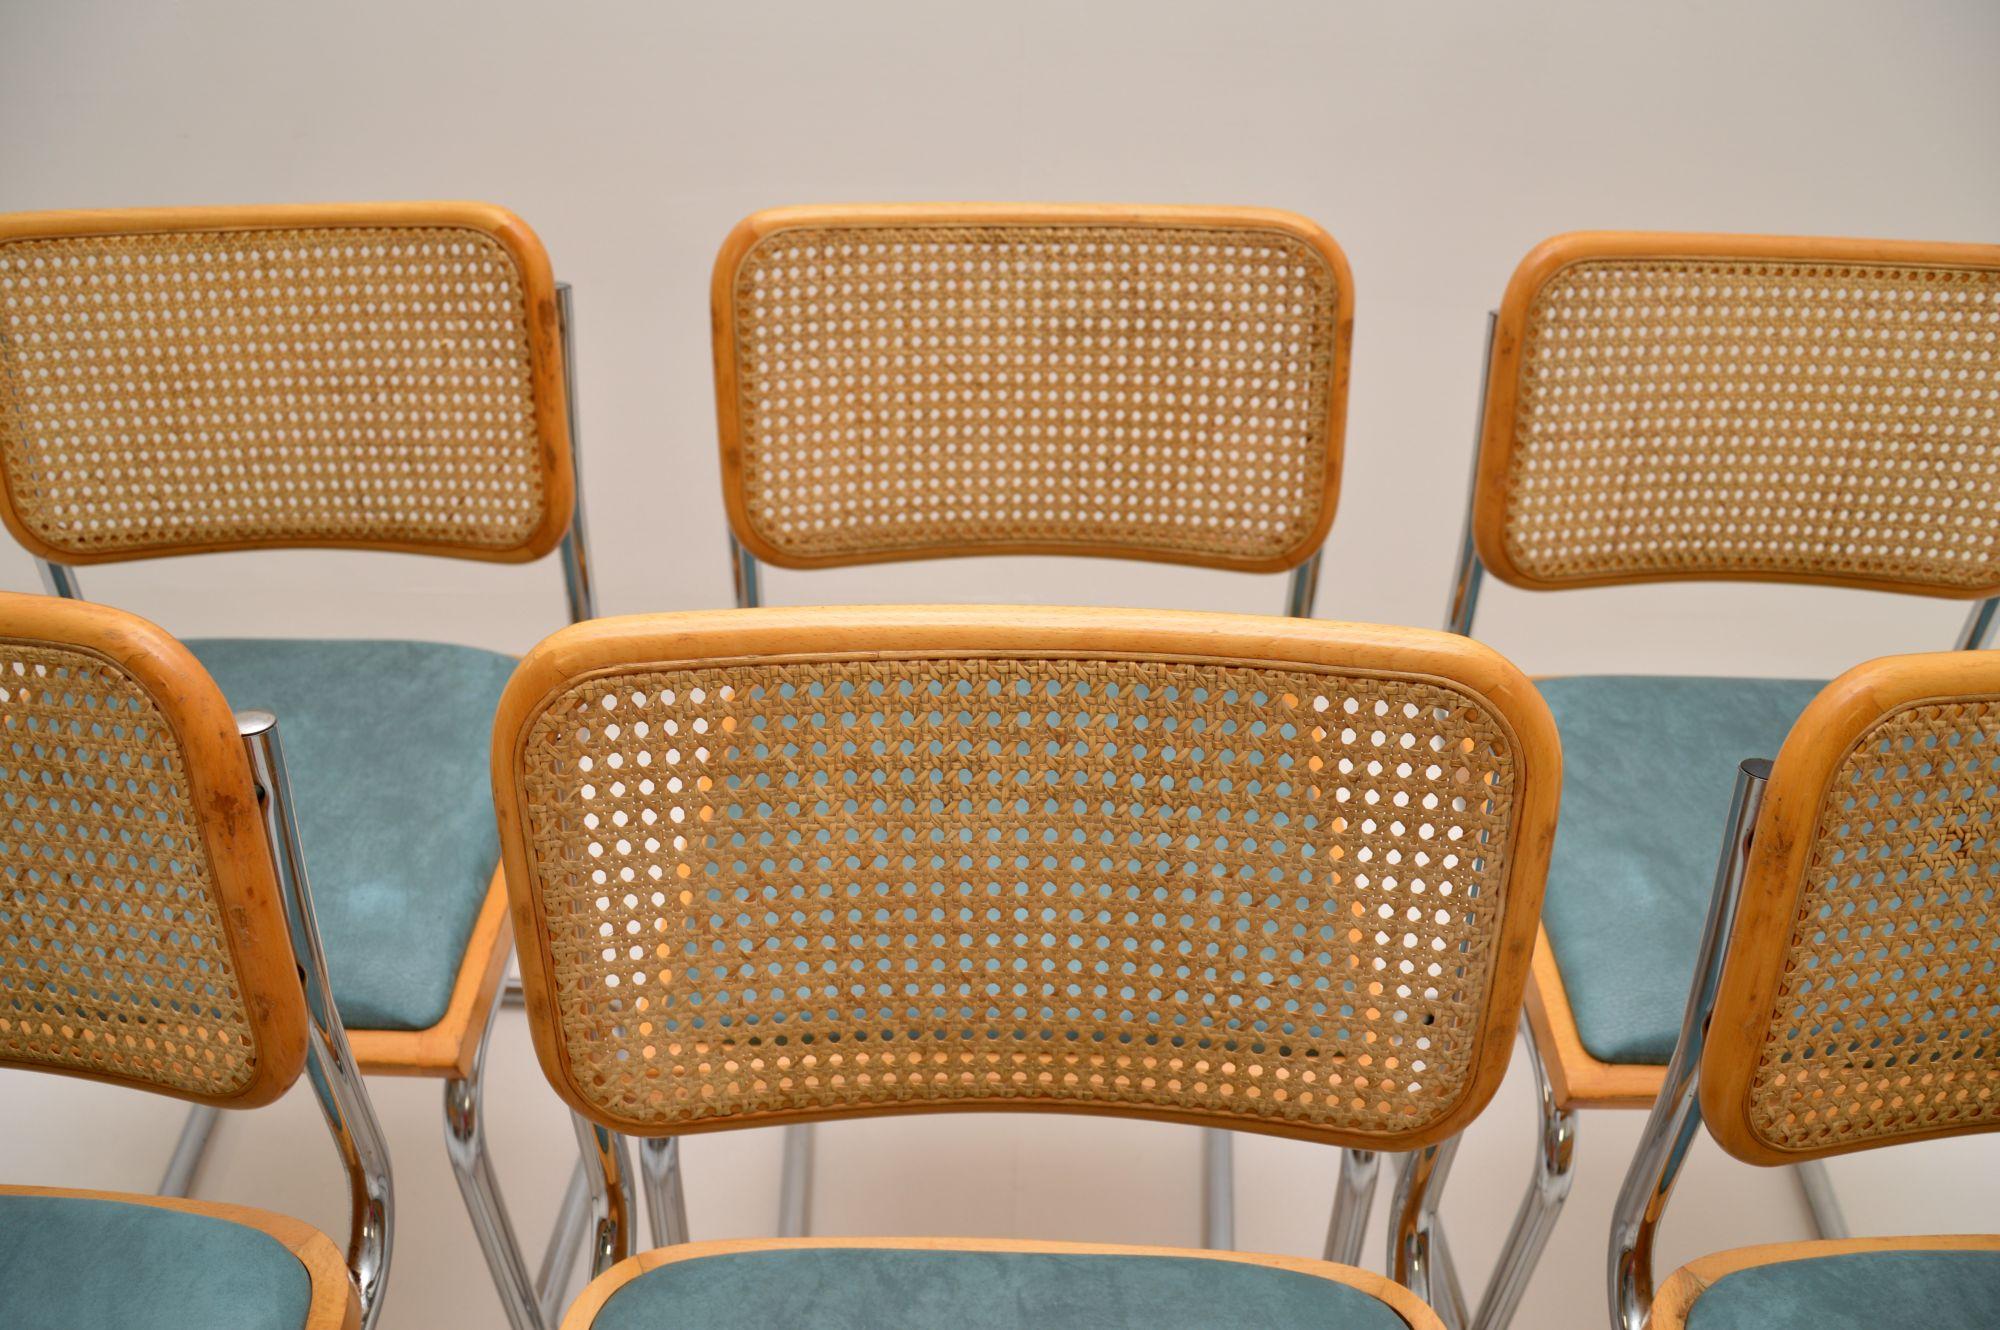 Caning 1970's Vintage Set of 6 Marcel Breuer 'Cesca' Chairs